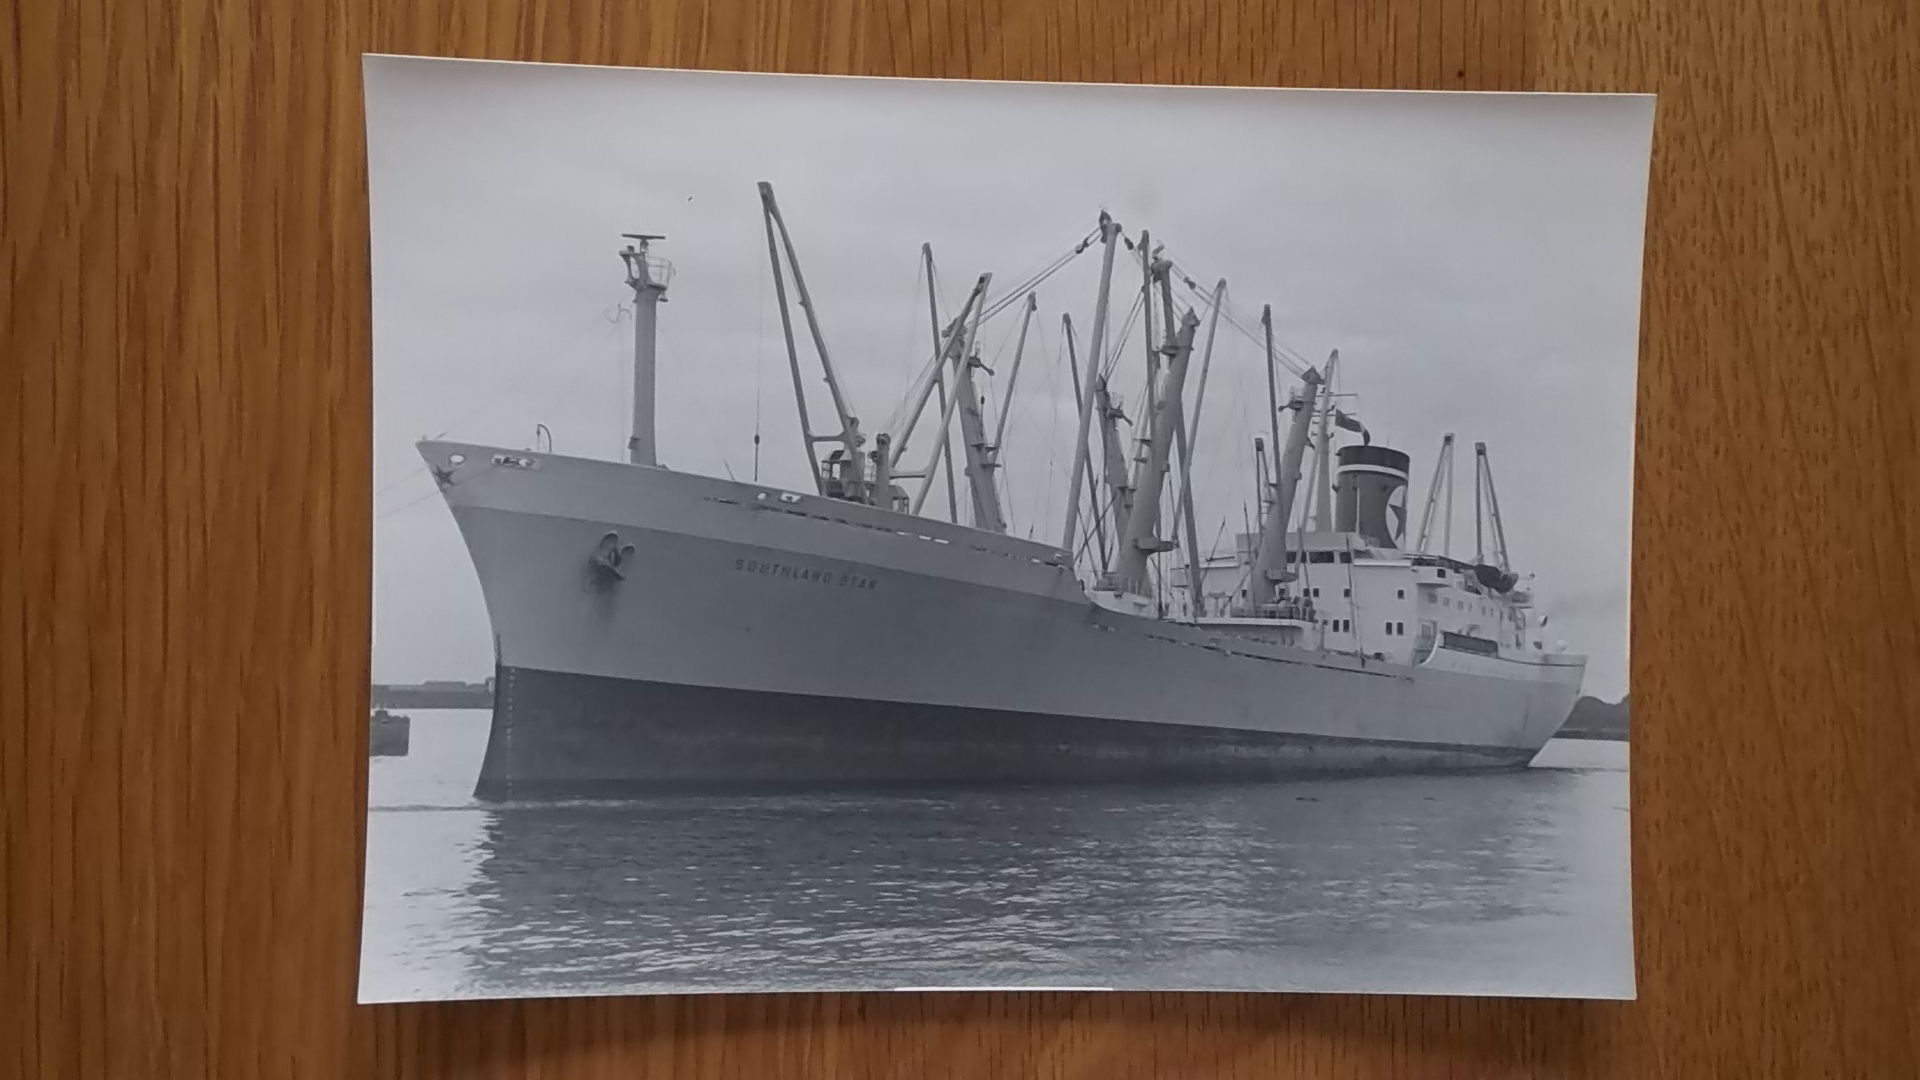 B/W PHOTOGRAPH OF THE VESSEL SOUTHLAND STAR TAKEN EARLY ON IN HER HISTORY